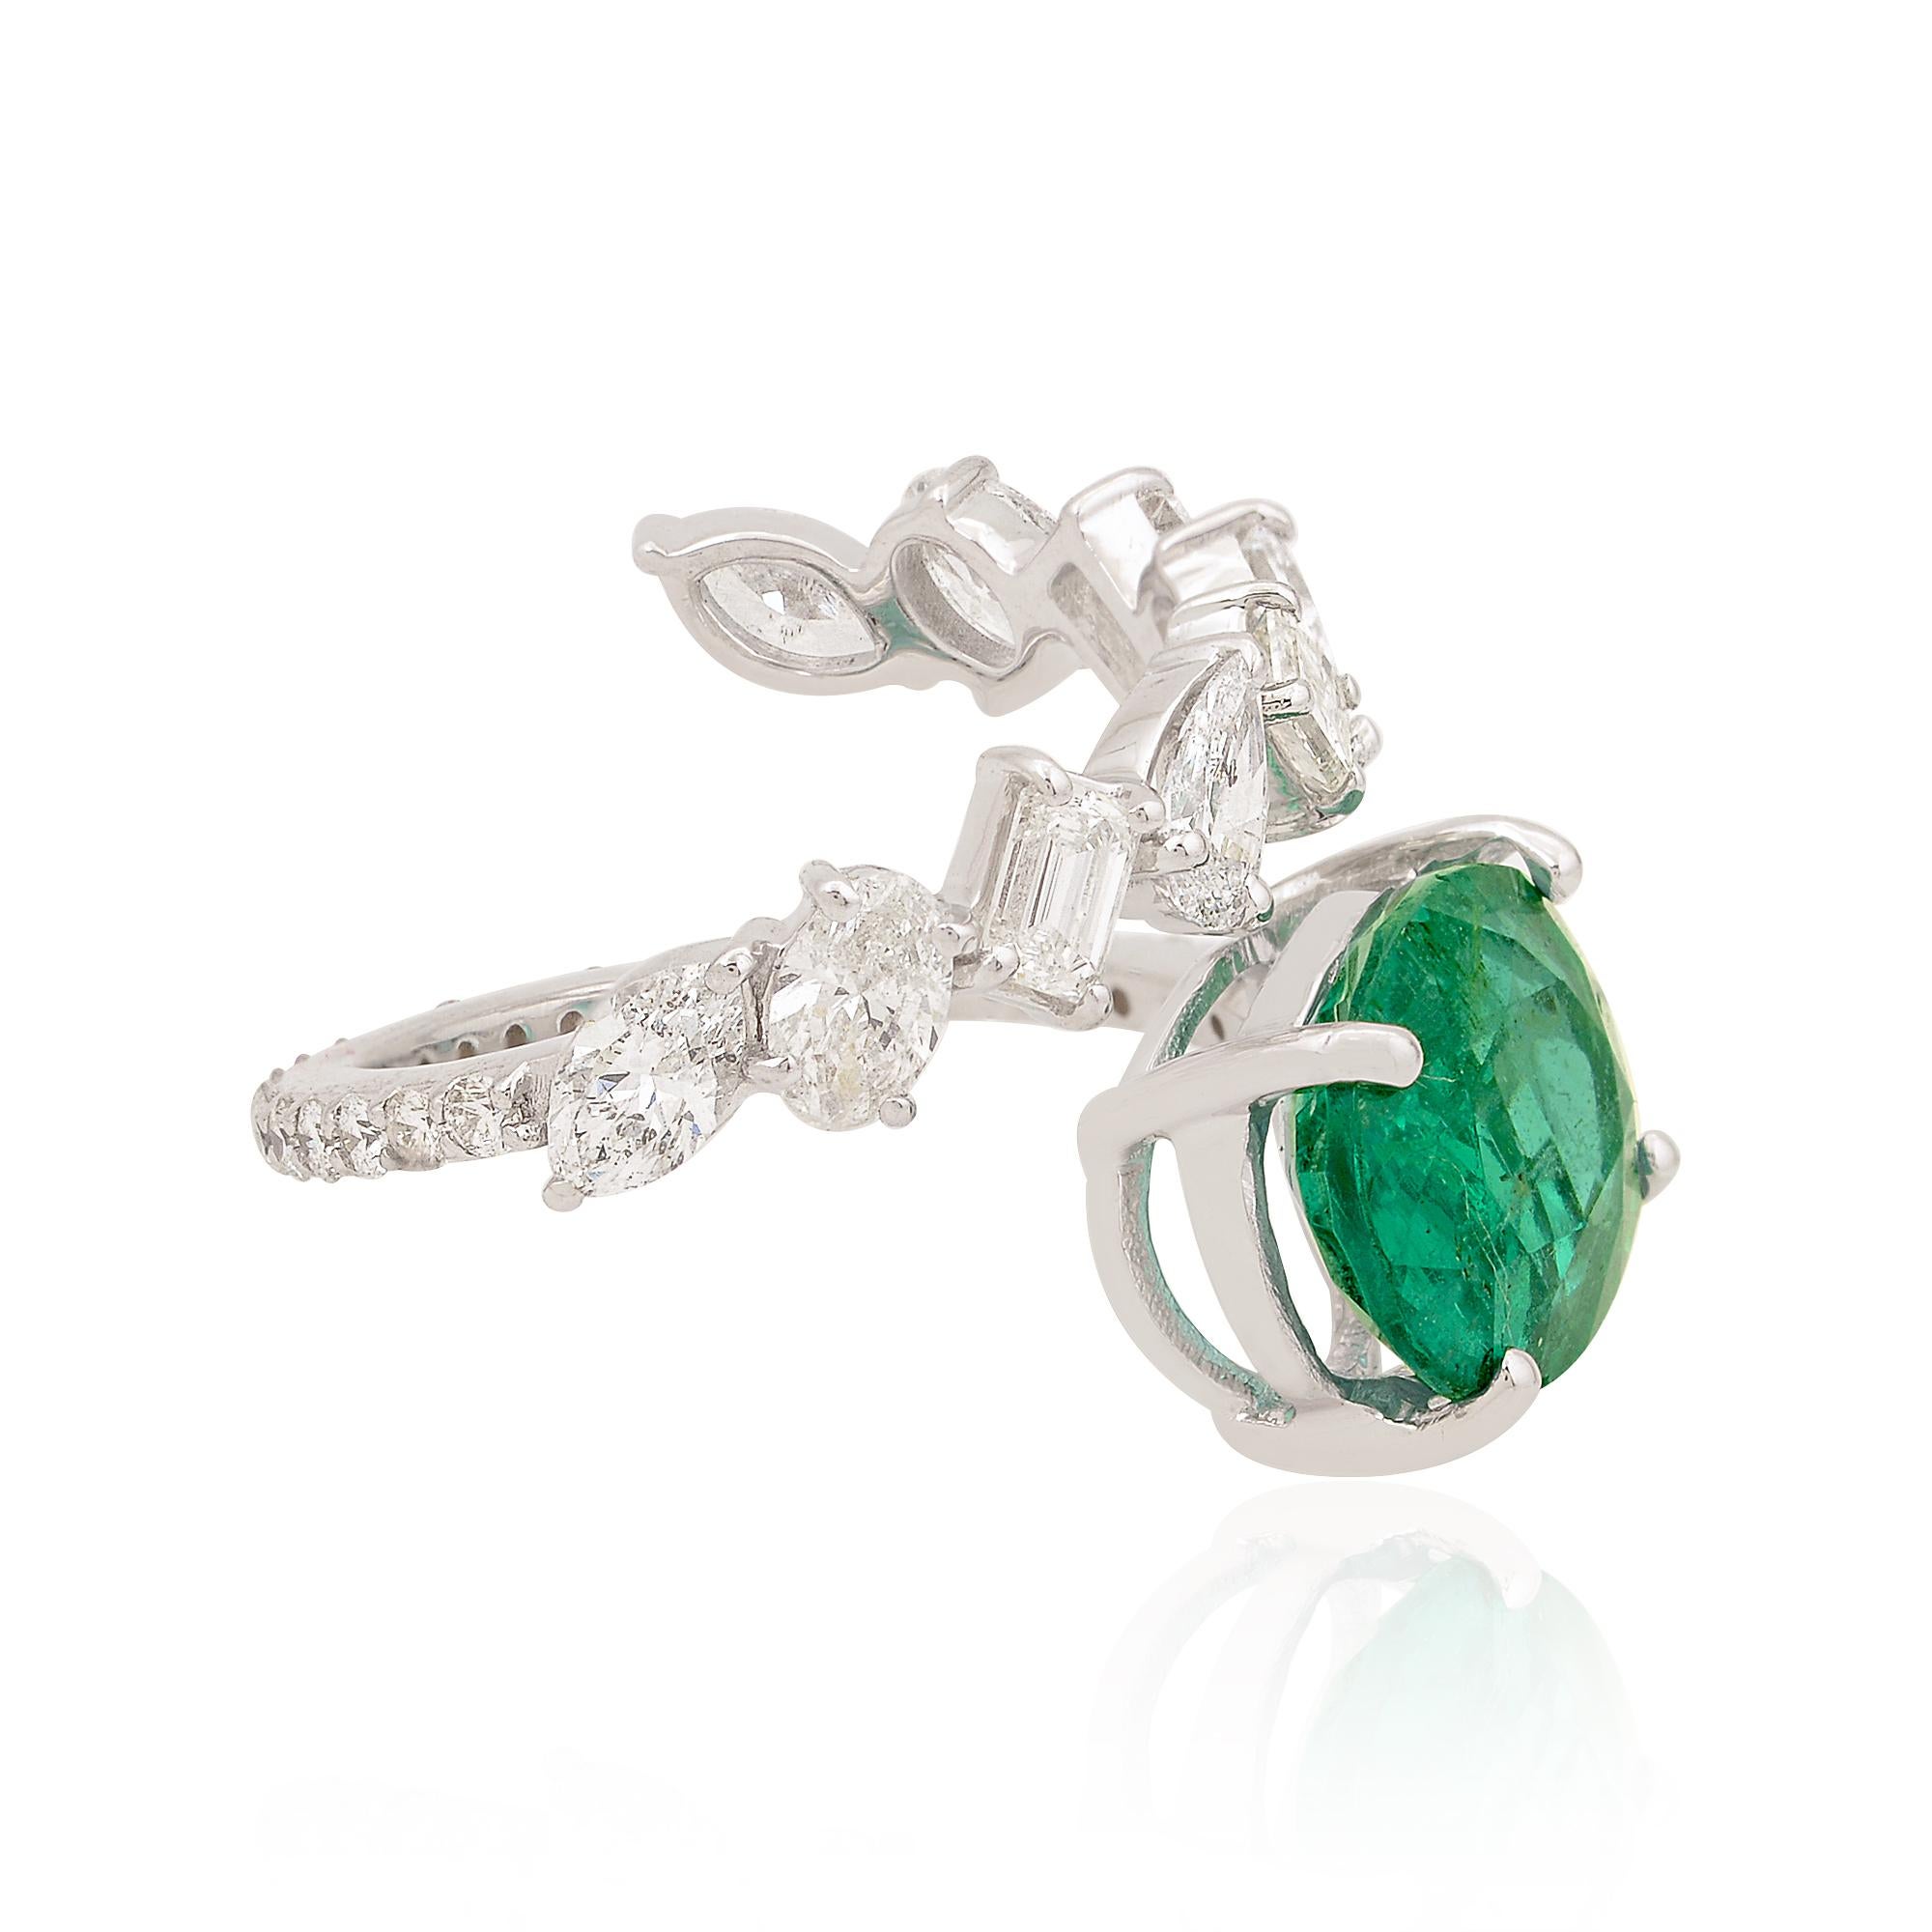 Life is stylish and beautiful when you have this 18k White Gold Ring which is indeed special. Wear your heart with the sparkling glory of Emerald that showcases a sharp youthful vibe. A finest pick to seal your love.

✧✧Welcome To Our Shop Spectrum